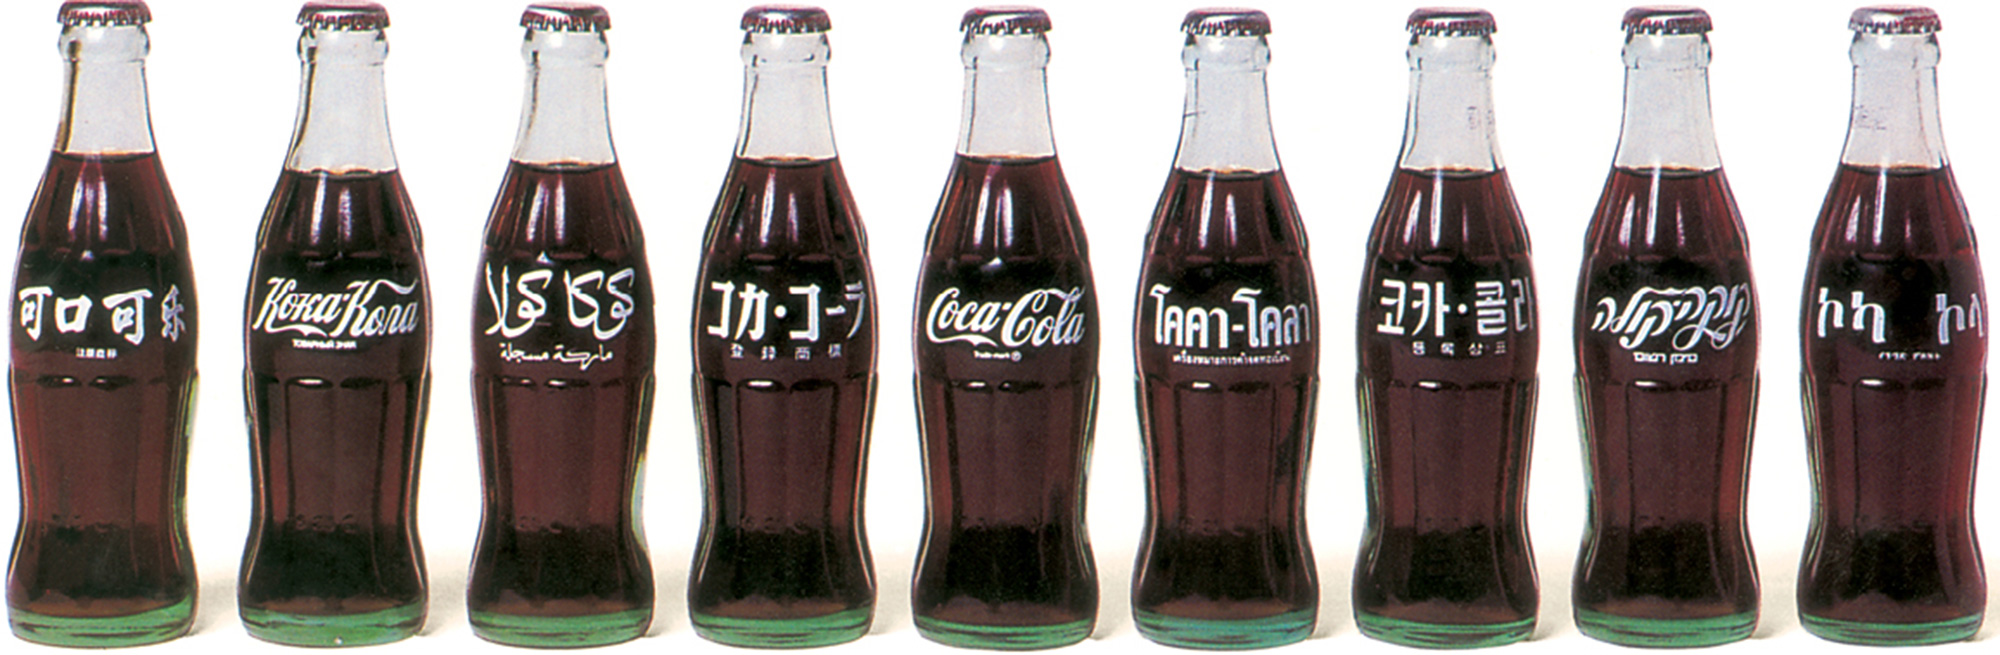 Hobbleskirt Coca-Cola bottles from different countries, nineteen eighty six. The countries included are China, Bulgaria, Morocco, Japan, United States, Thailand, Korea, Israel, and Ethiopia.